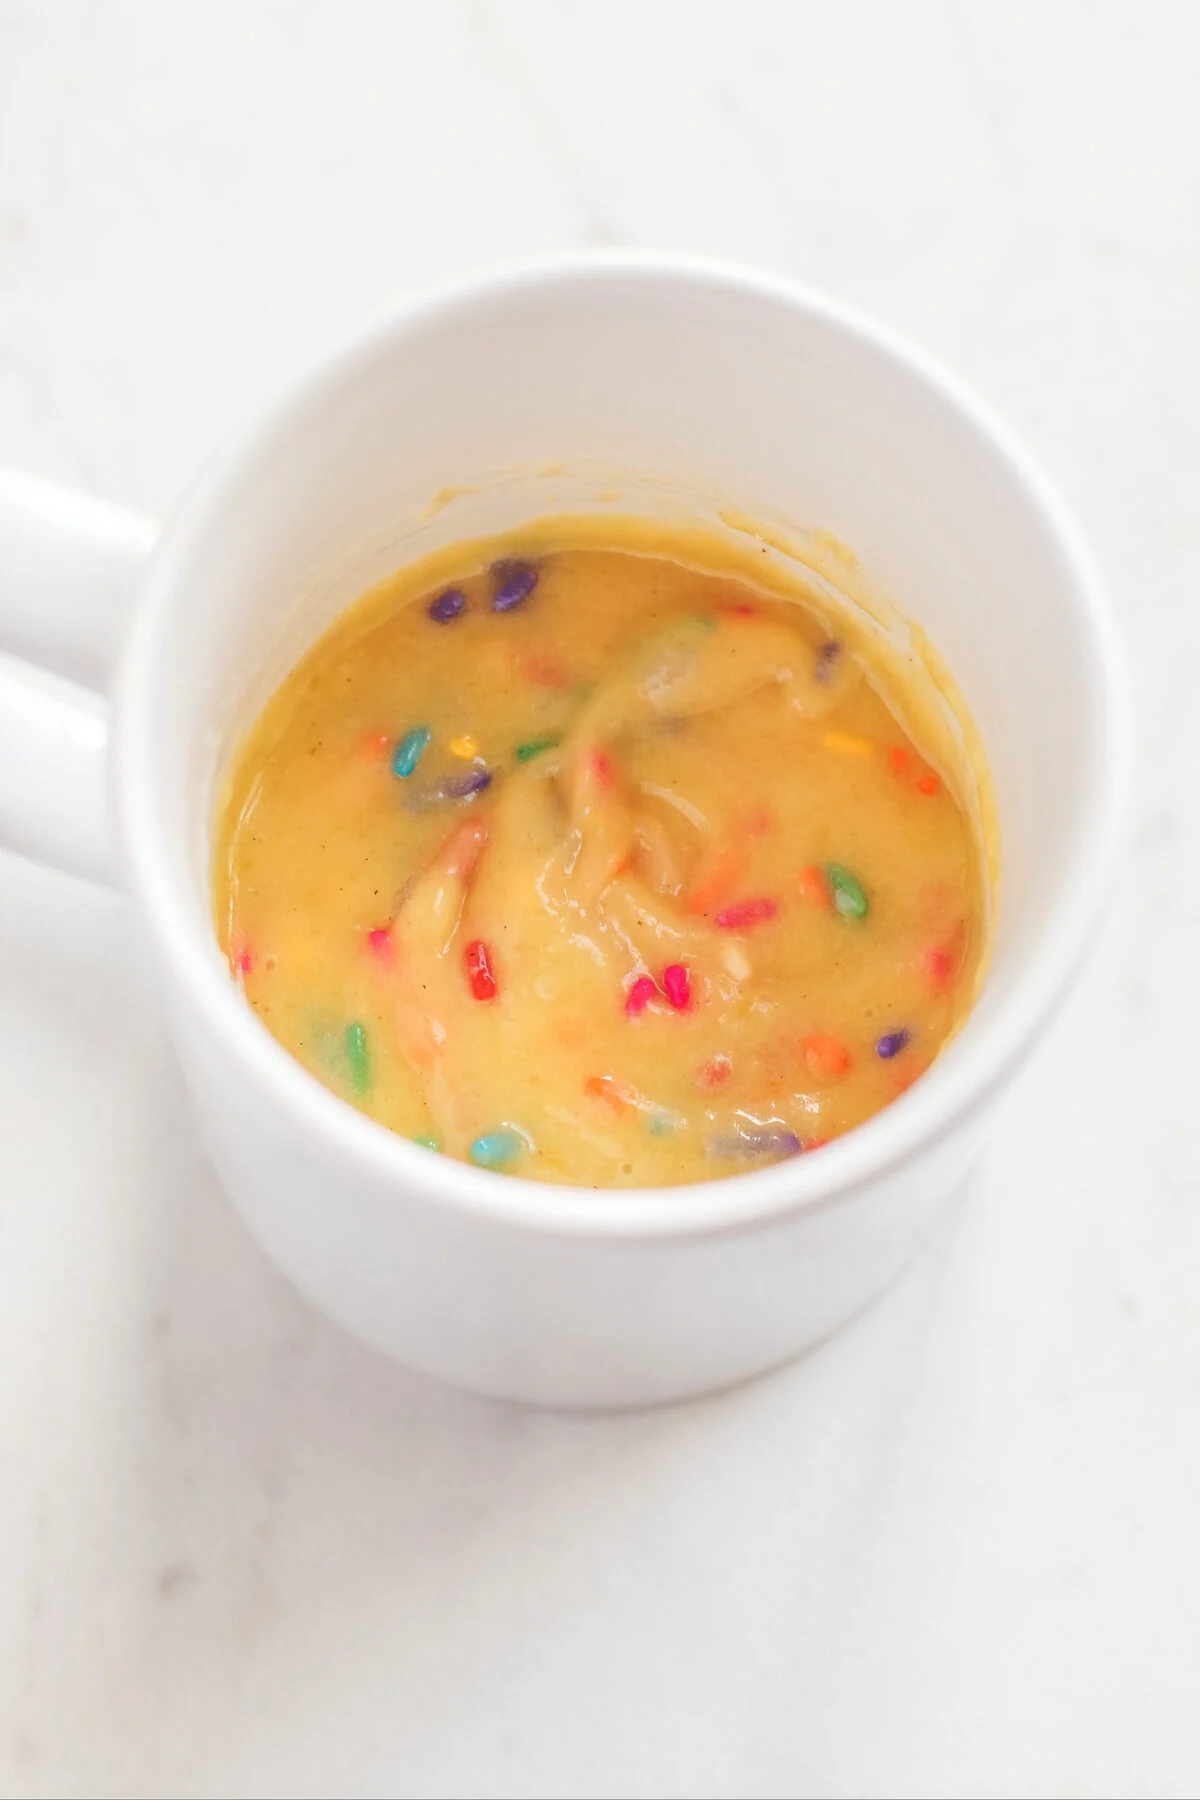 Sprinkles mixed into the batter in the mug.